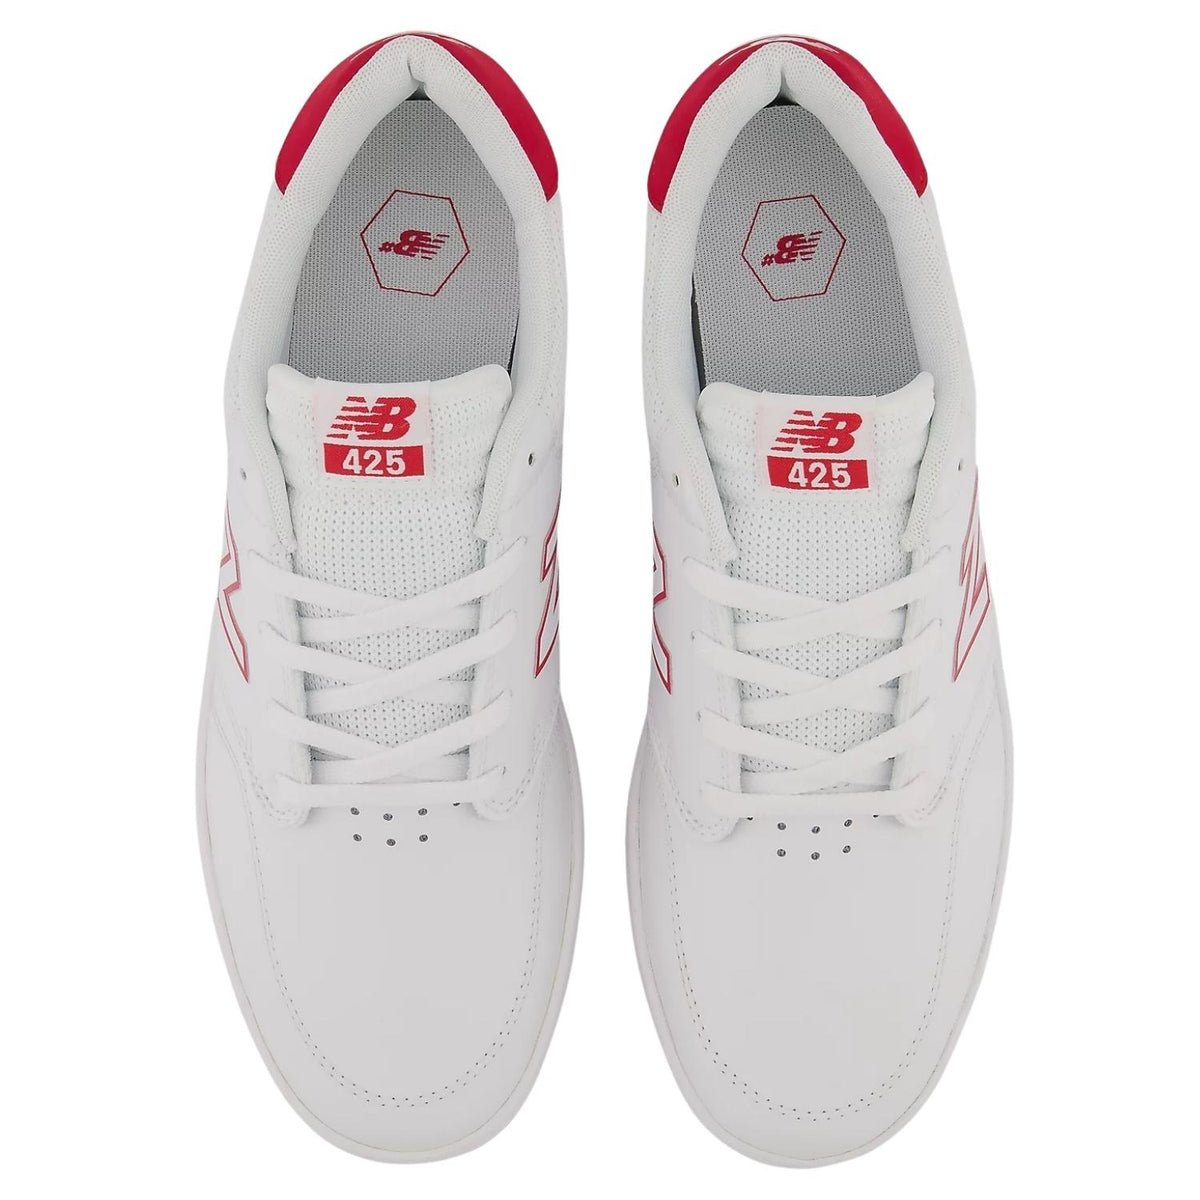 New Balance Numeric NM425 Shoes - White/Red